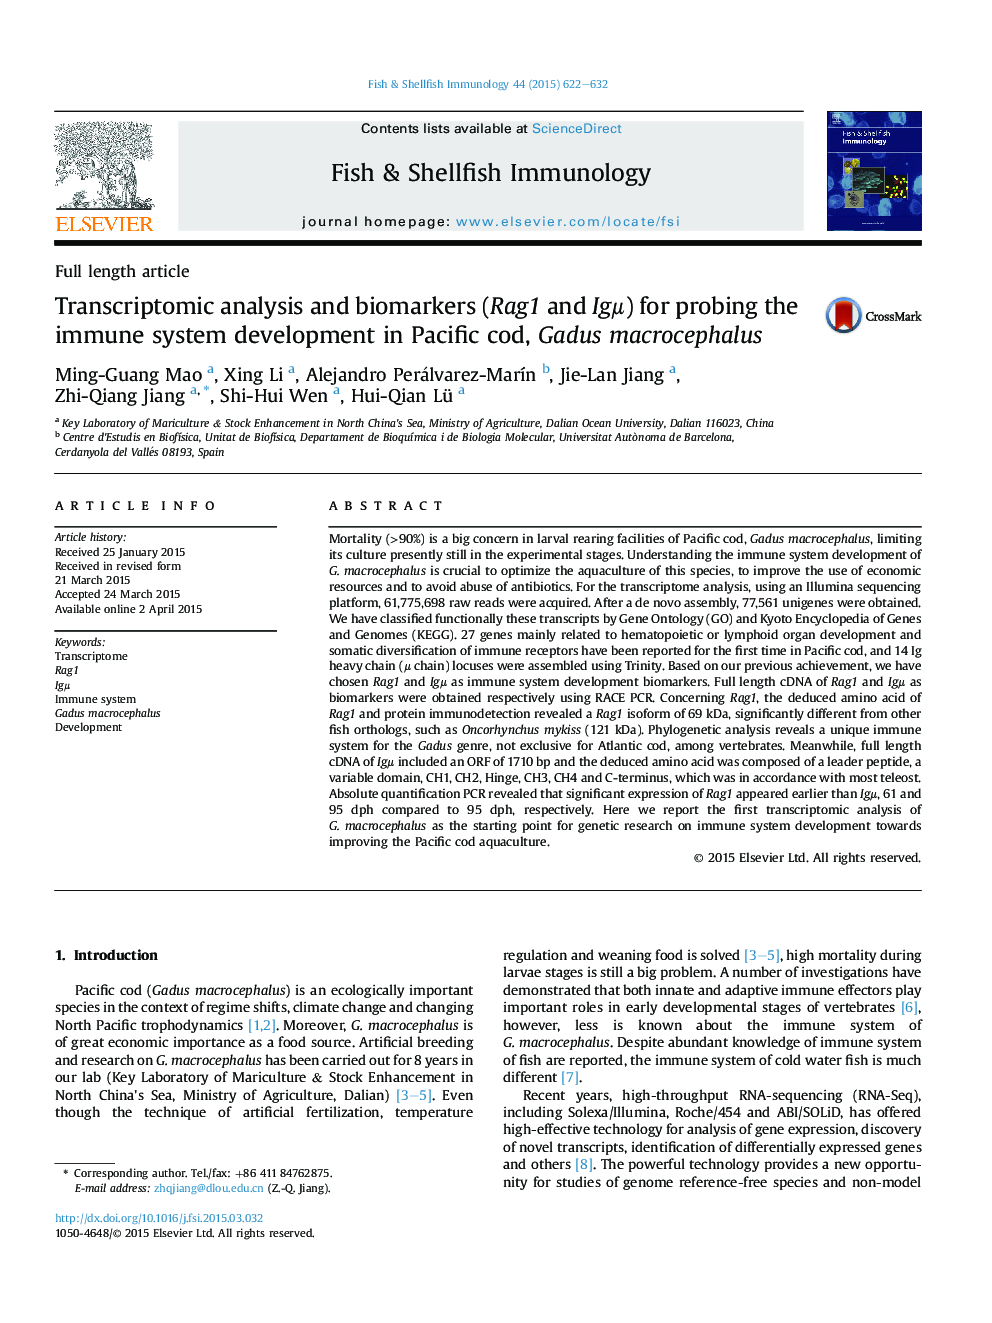 Transcriptomic analysis and biomarkers (Rag1 and Igμ) for probing the immune system development in Pacific cod, Gadus macrocephalus